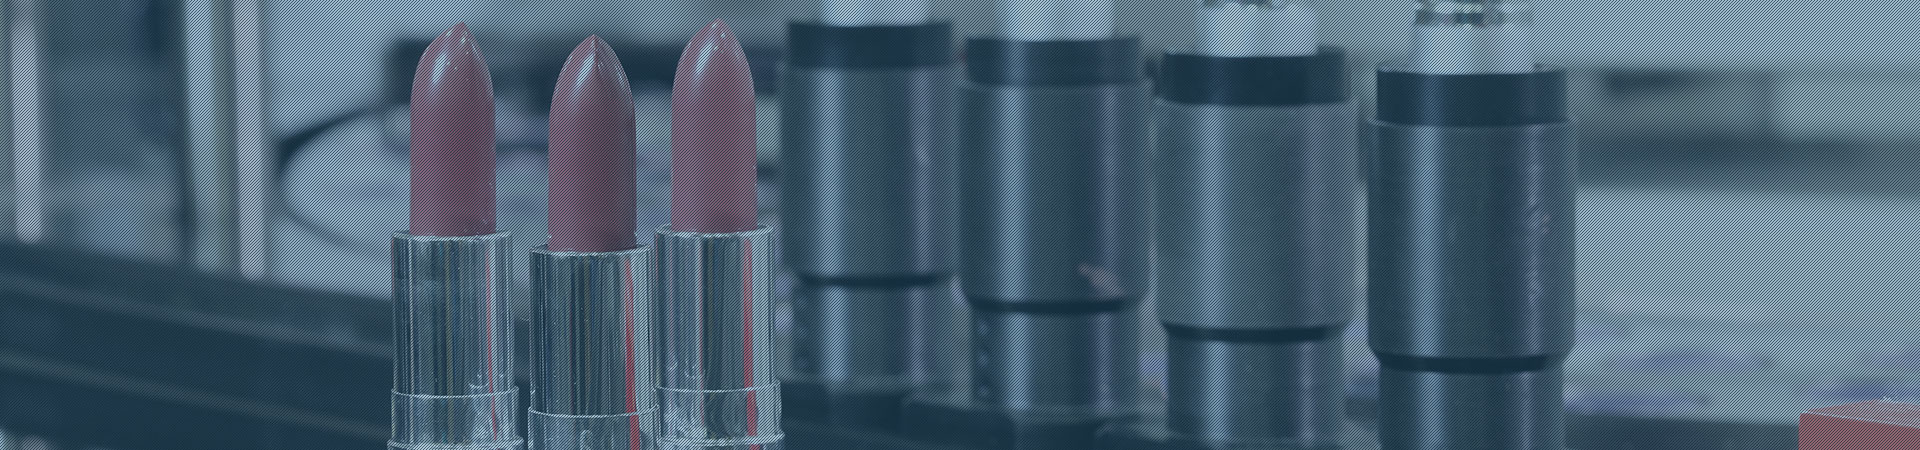 Printing technology for the cosmetics industry - full size